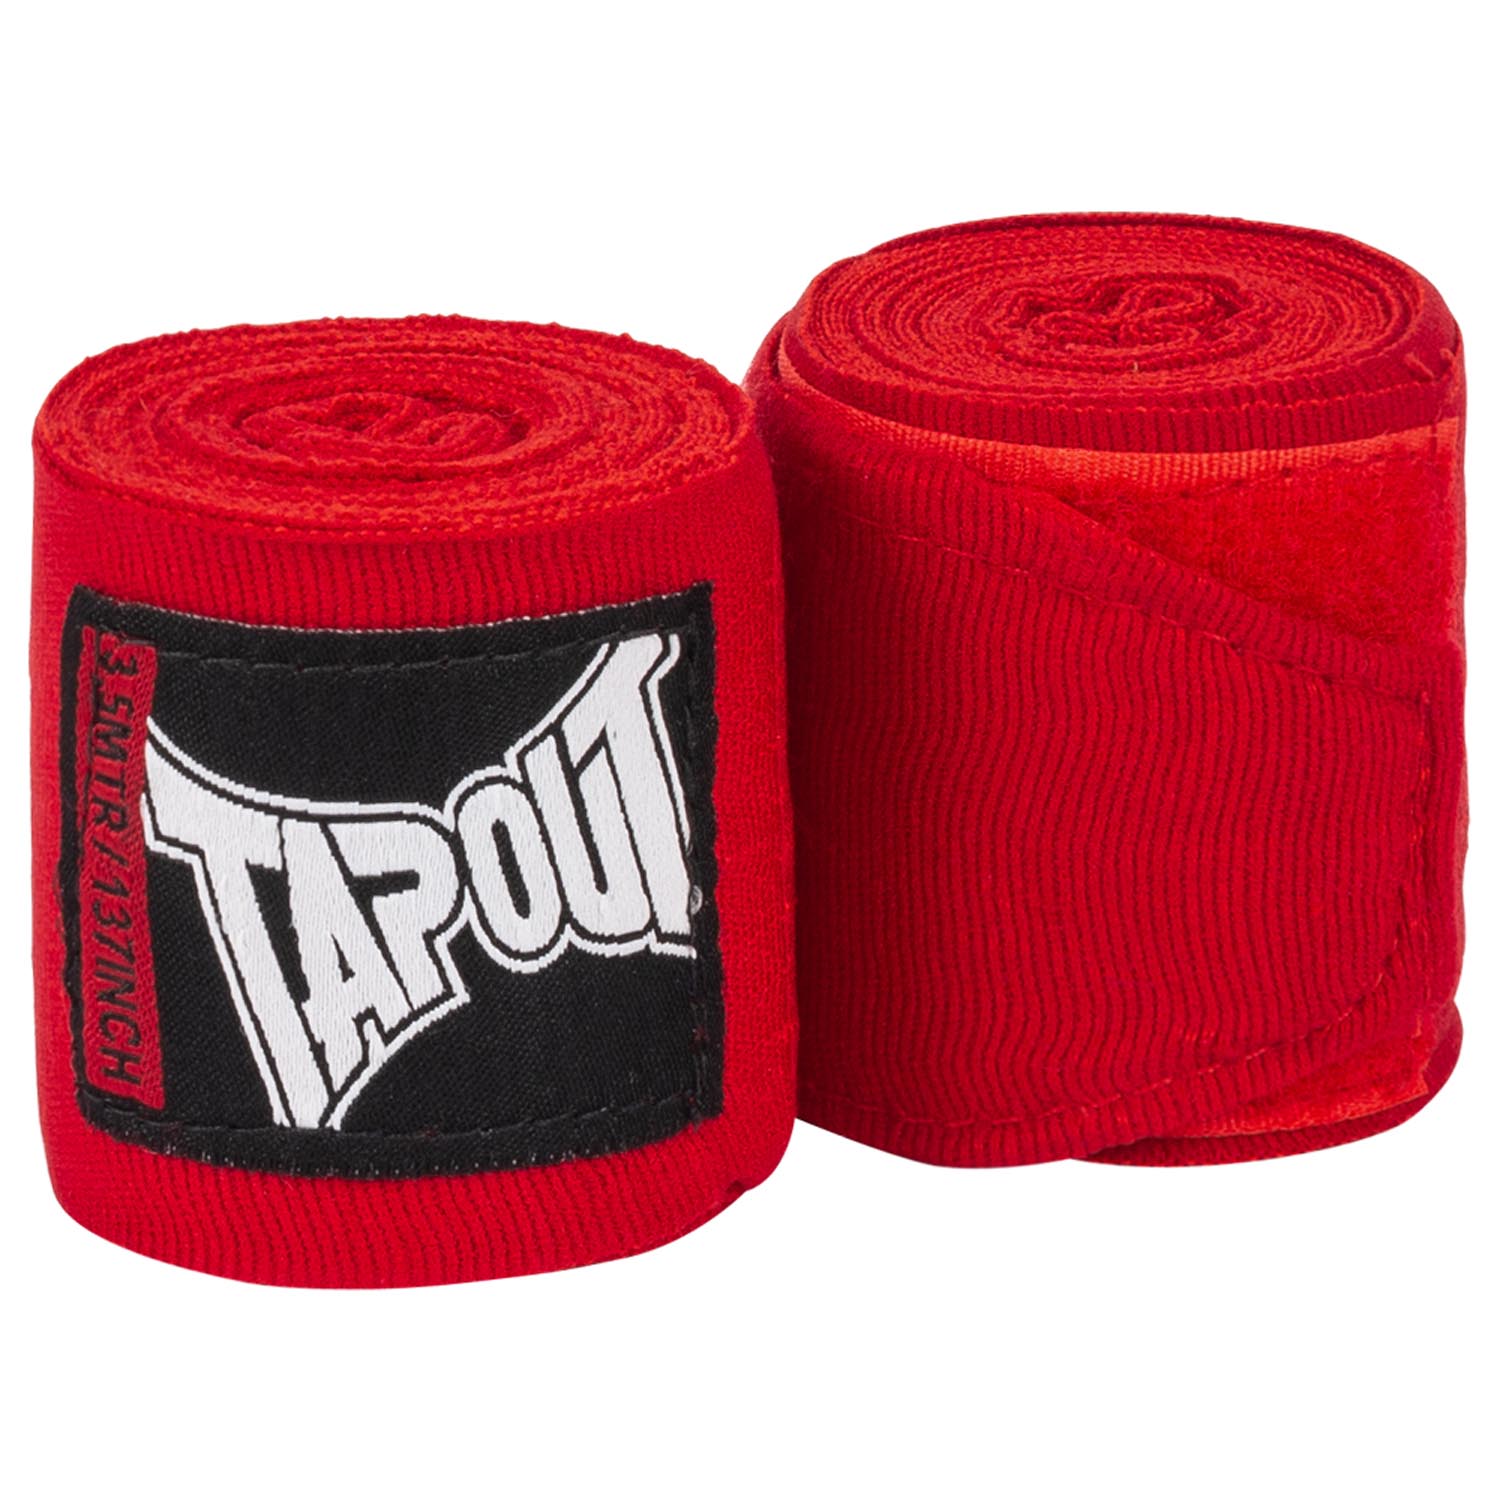 Tapout Handwraps, Sling, 5 m, red